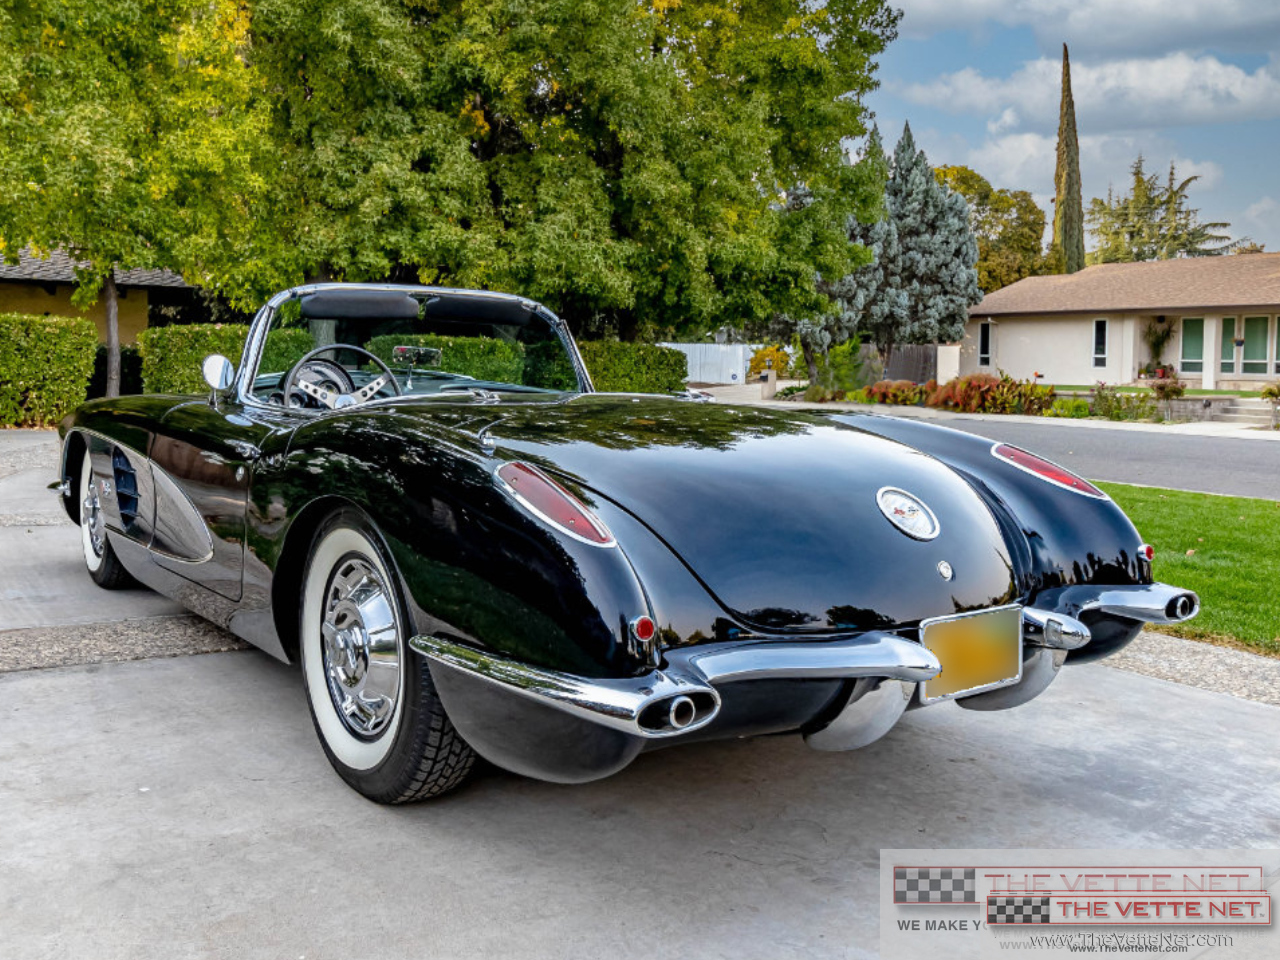 1959 Corvette Convertible Black with Gray Coves